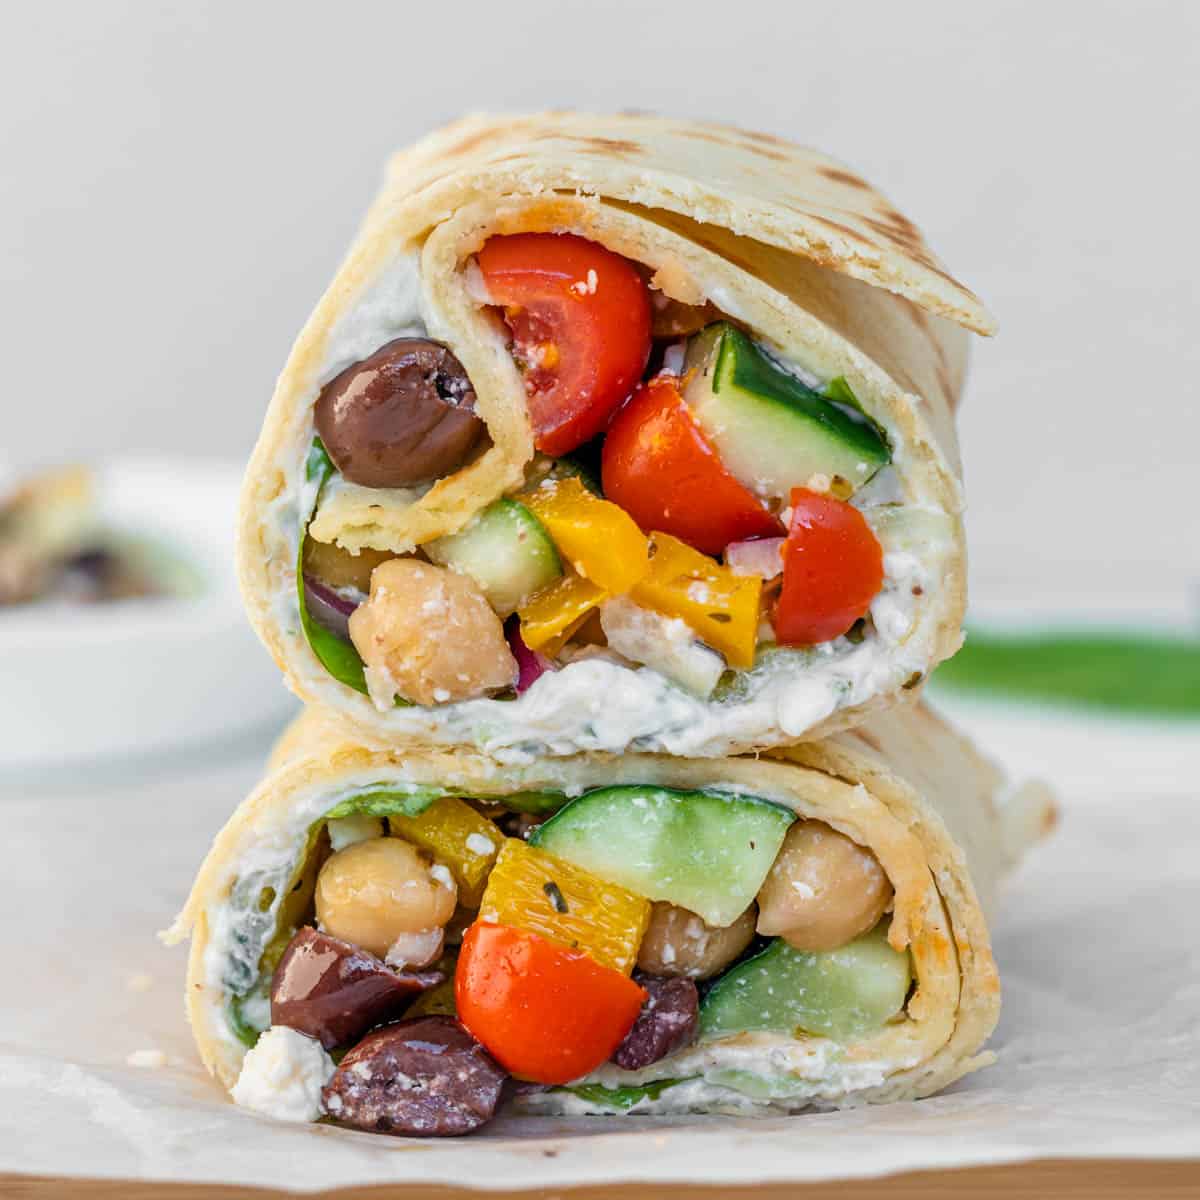 https://cookingwithayeh.com/wp-content/uploads/2022/07/Greek-Wrap-00.jpg